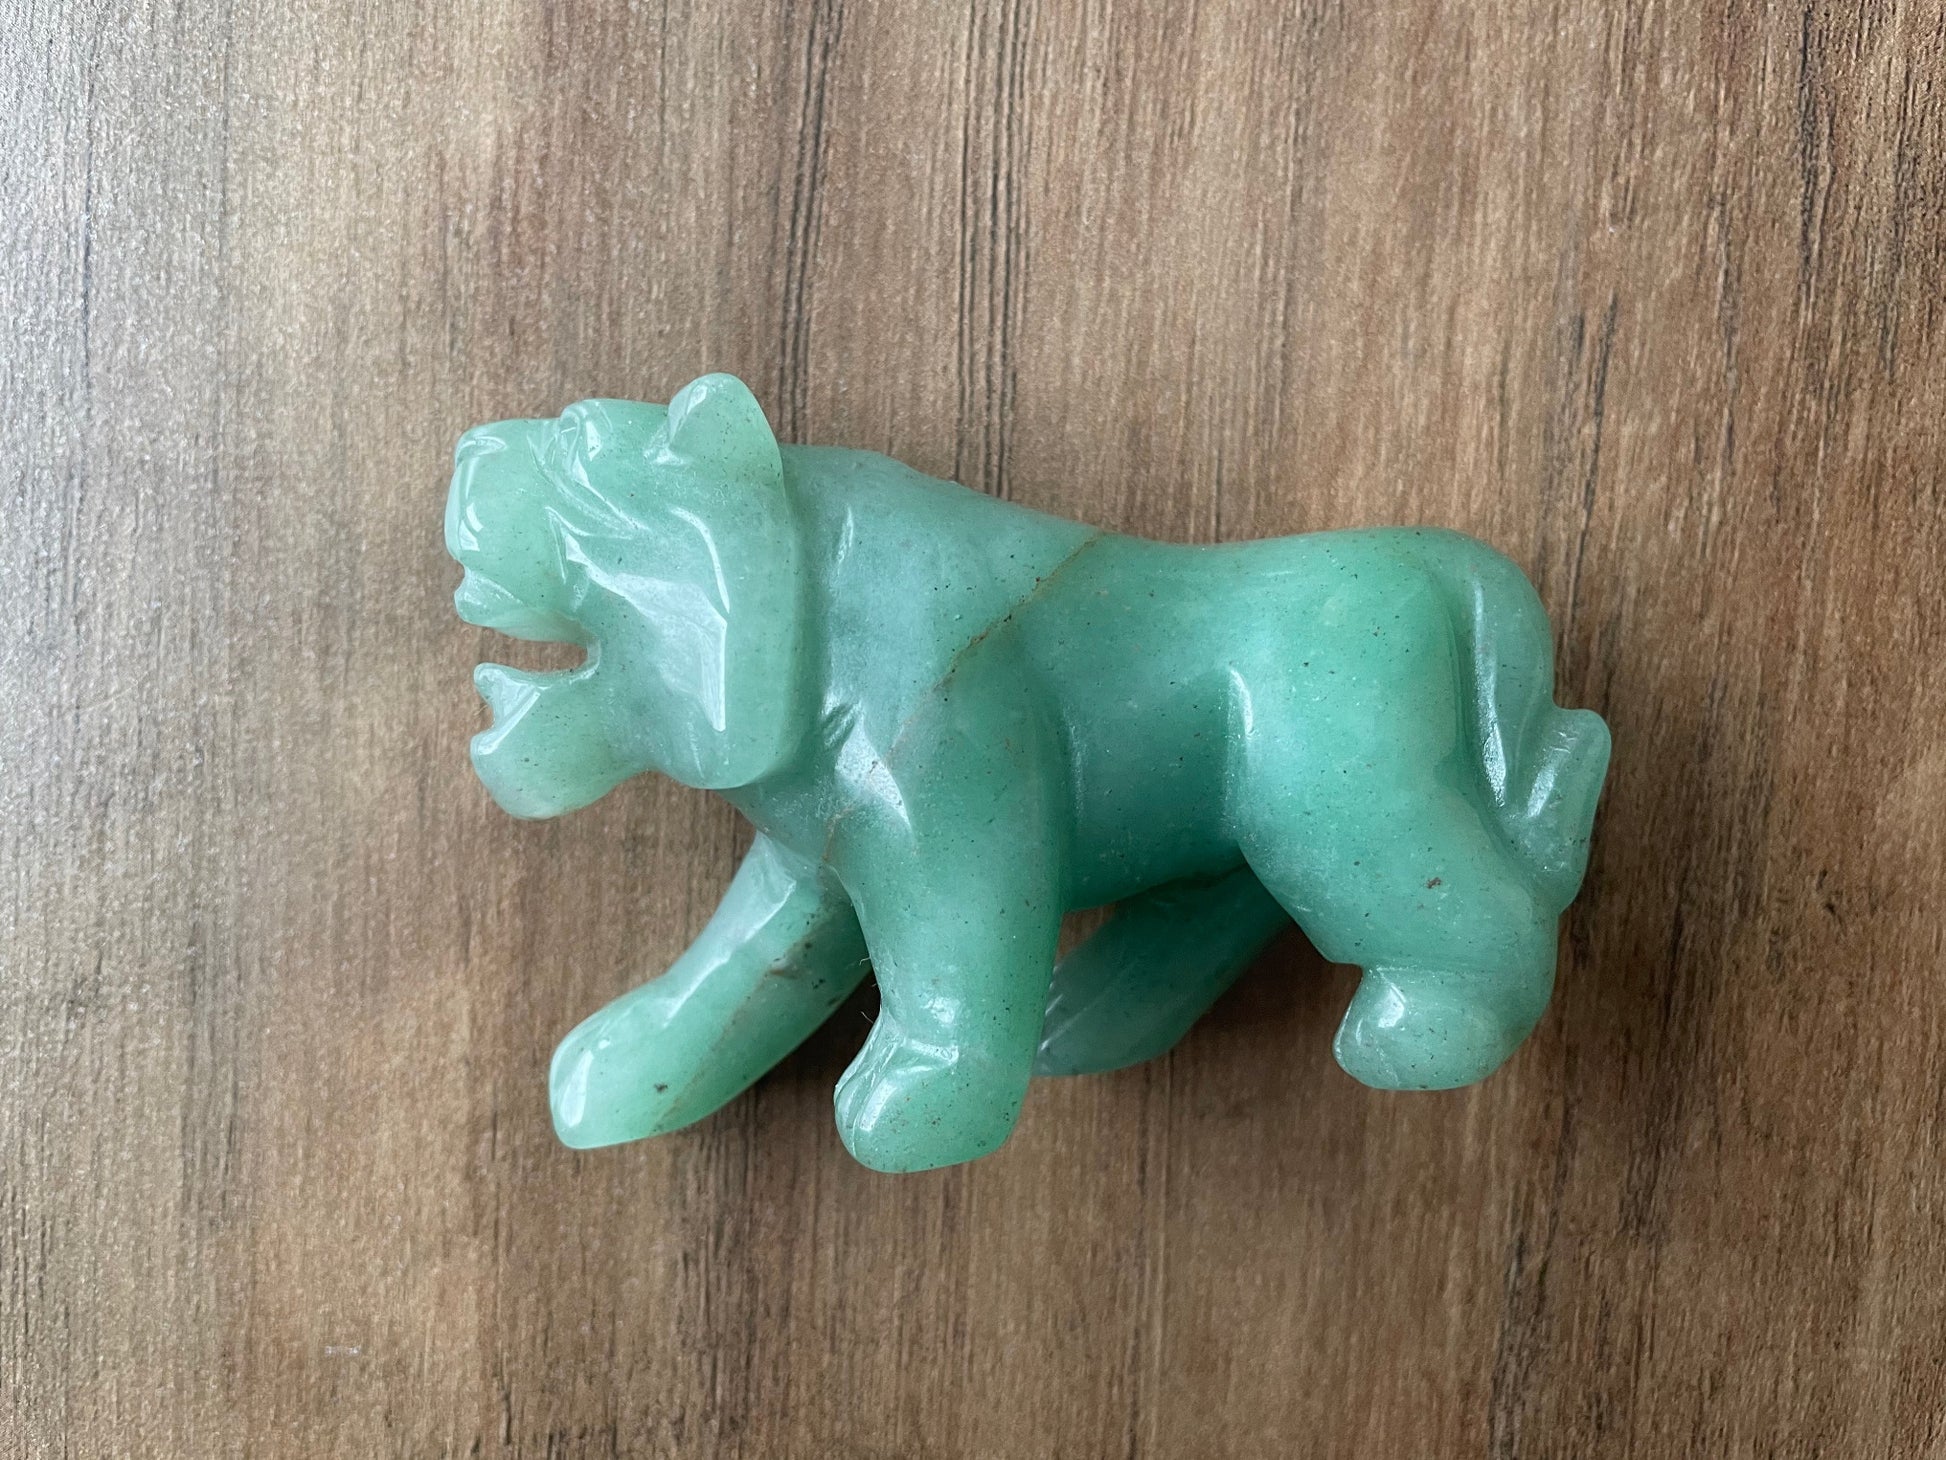 Pictured is a tiger carved out of green aventurine.